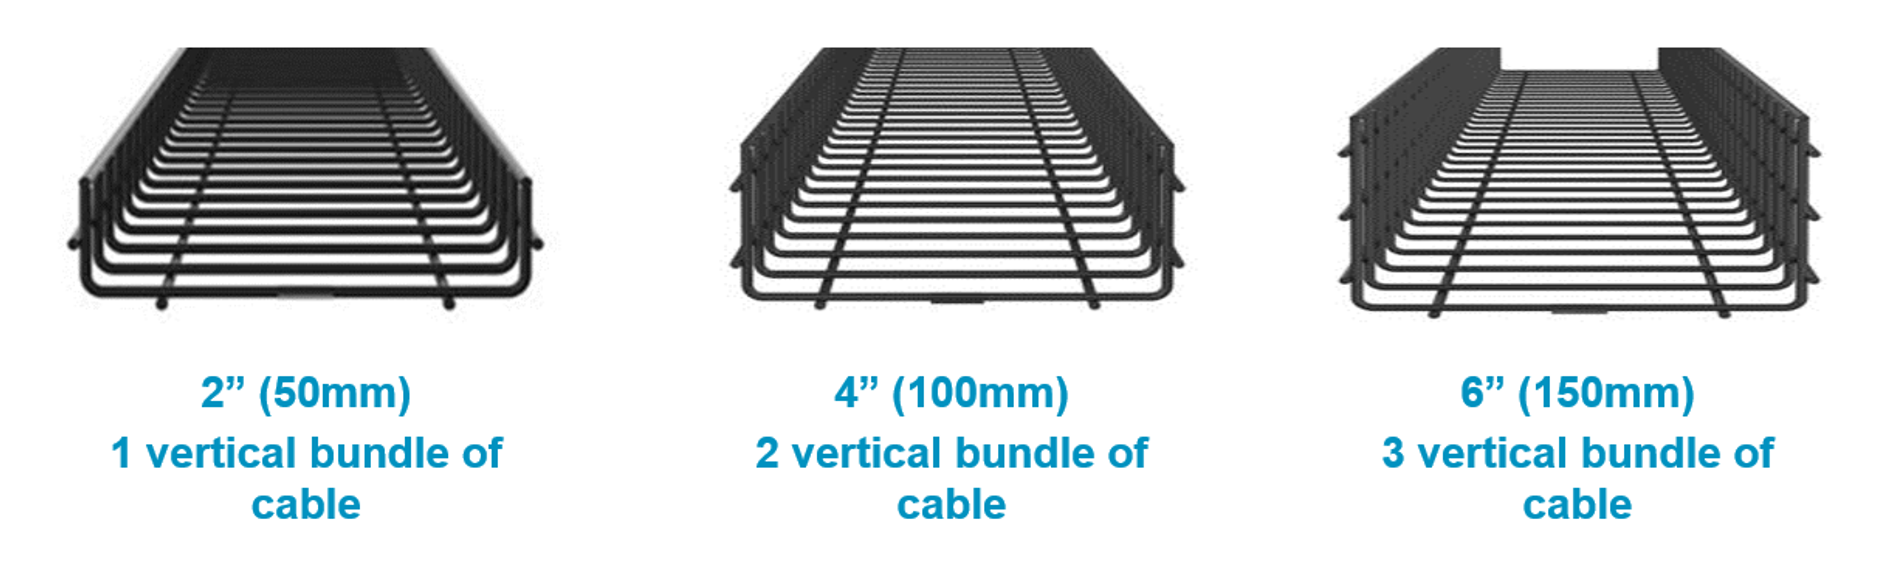 Wire Basket Height Sizing